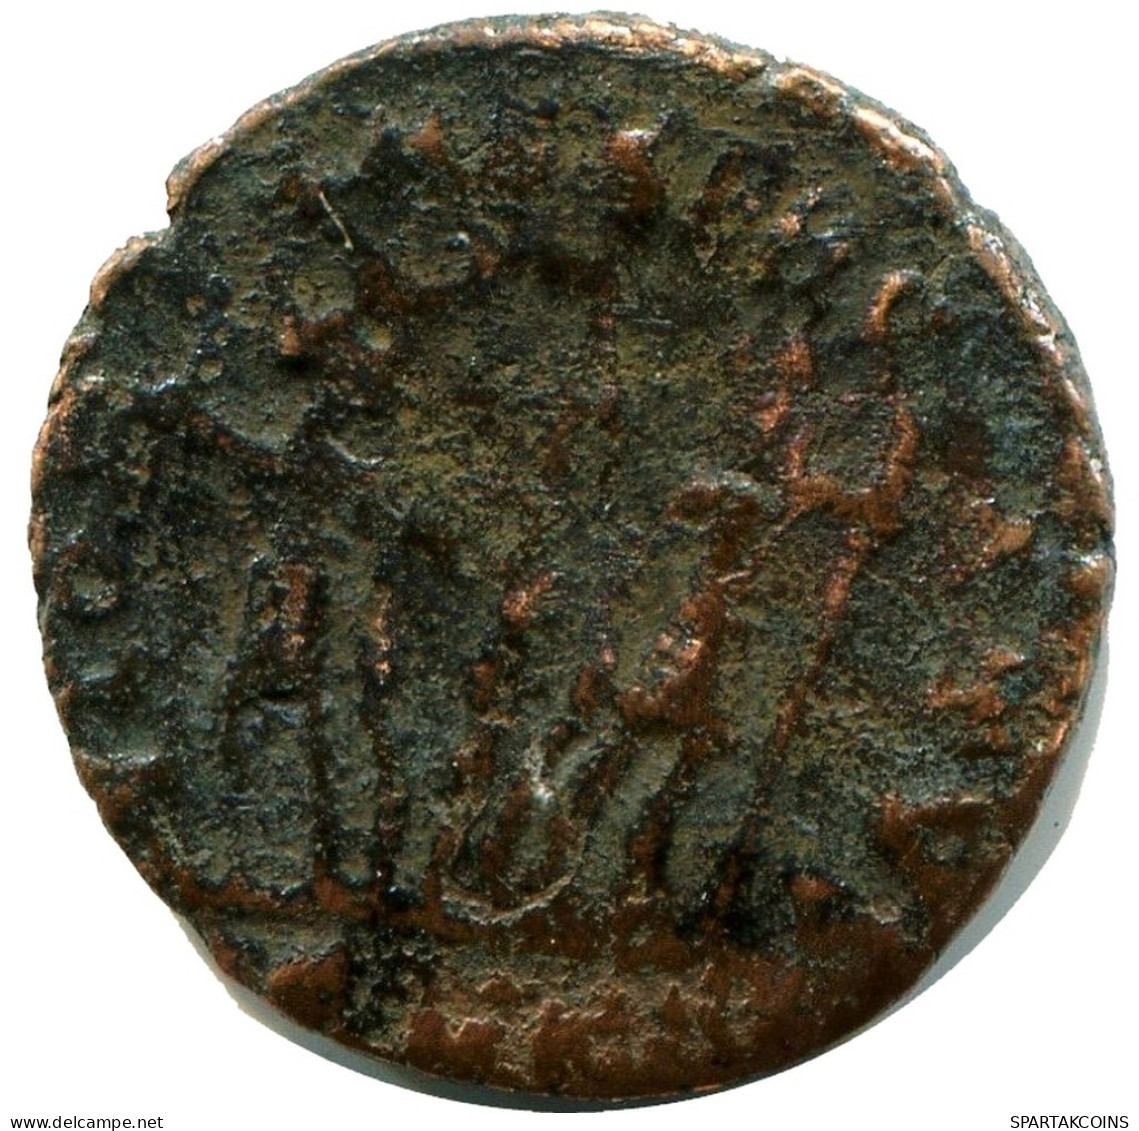 CONSTANS MINTED IN CYZICUS FROM THE ROYAL ONTARIO MUSEUM #ANC11659.14.F.A - El Impero Christiano (307 / 363)